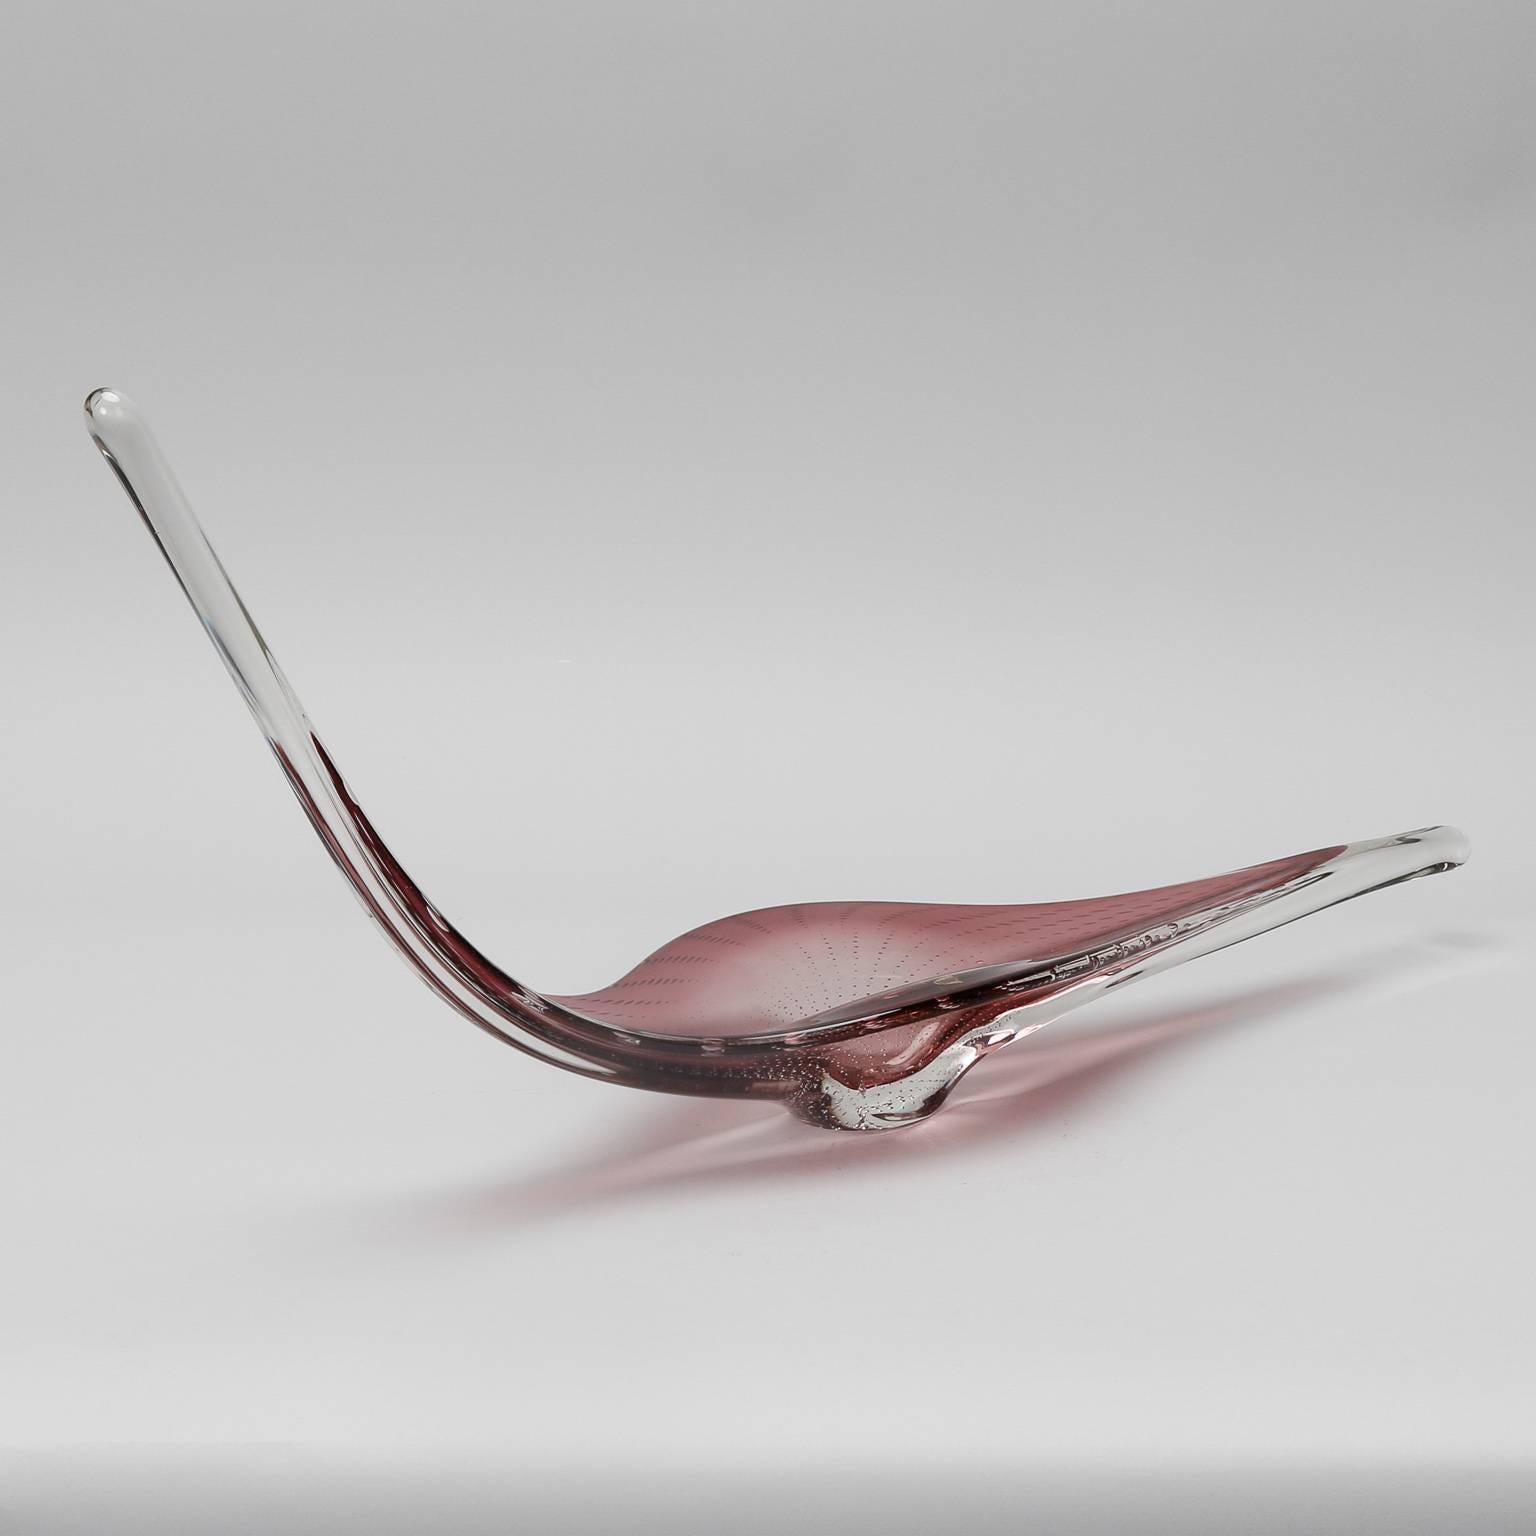 Art glass bowl with dramatic elongated and curved rim by Belgium firm Boussu, circa 1960s. Purple and clear handcrafted glass with bubbles in the base. Original (partial) label still affixed.